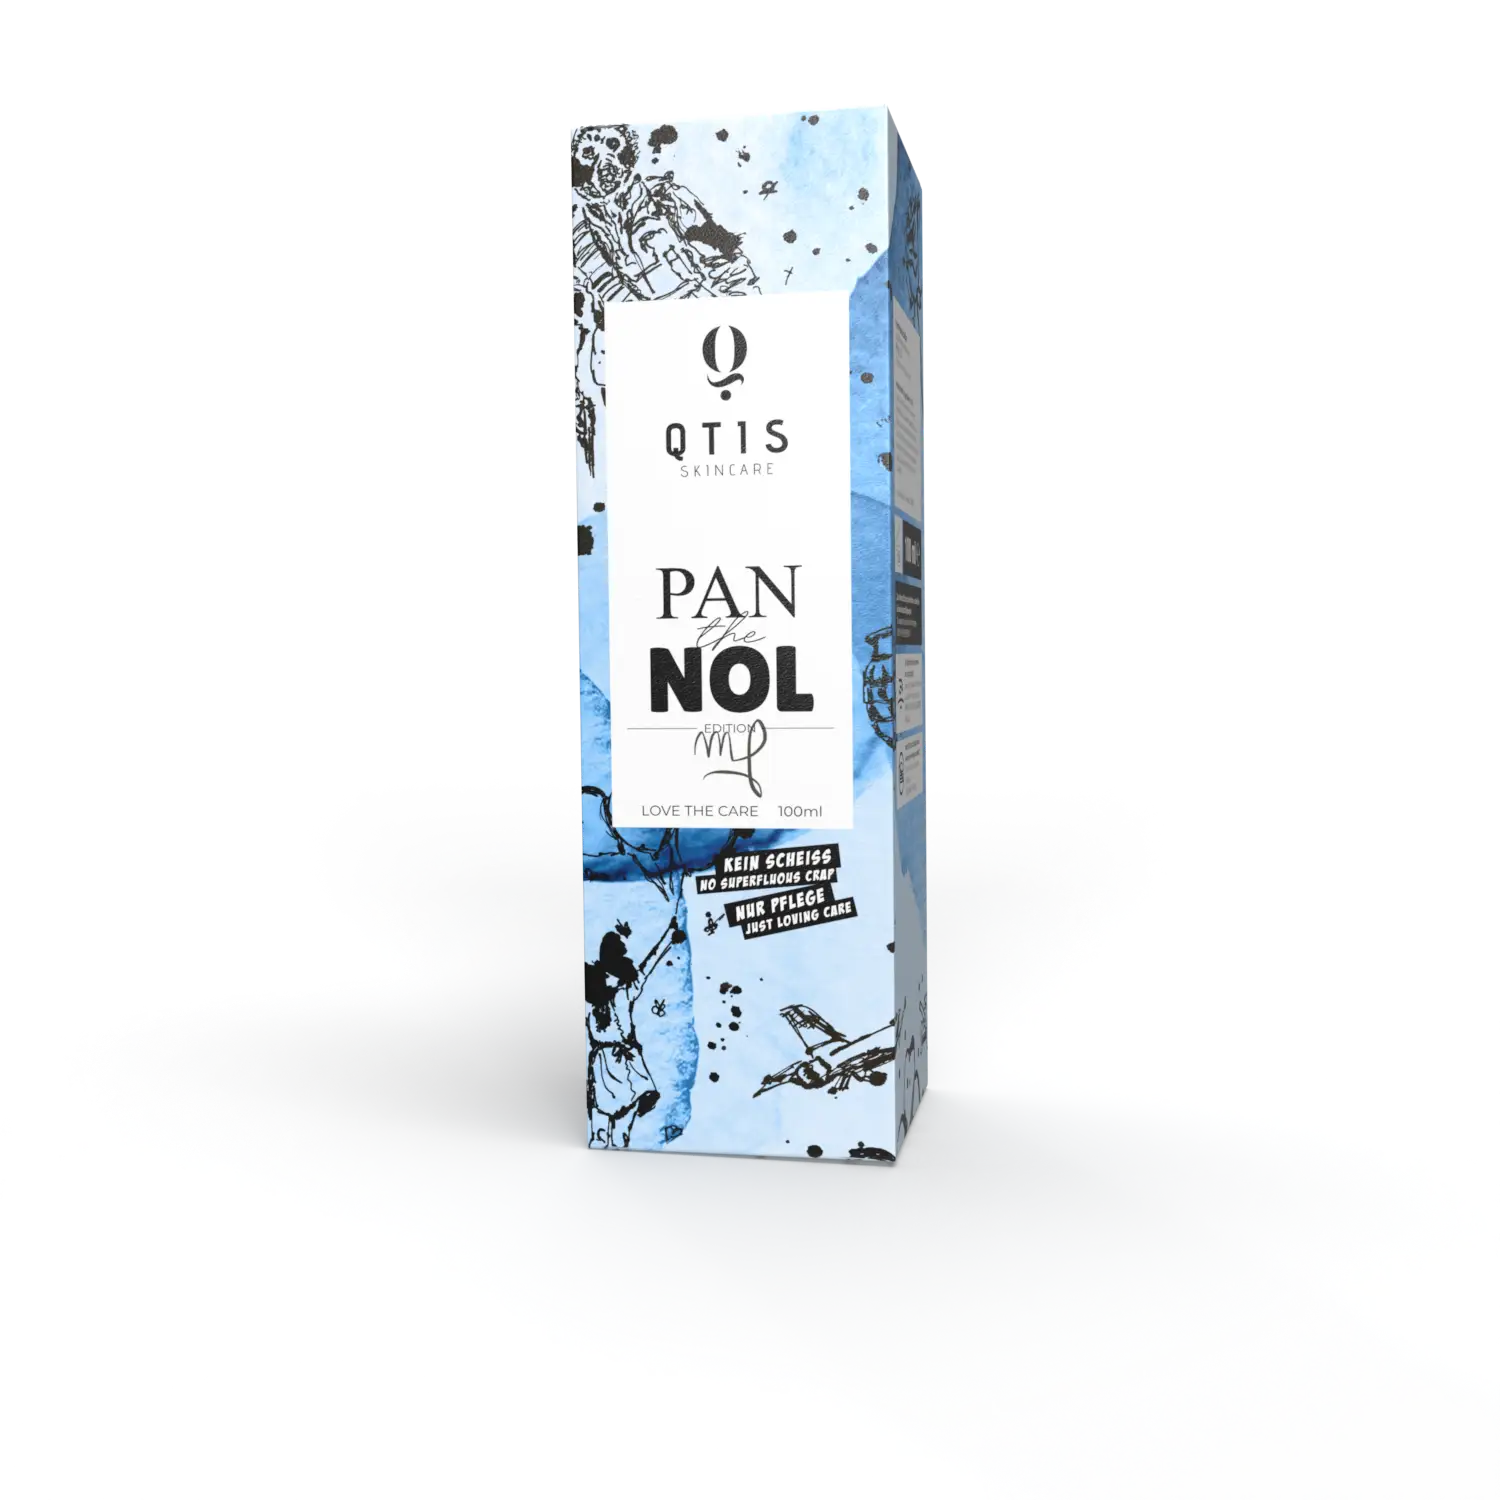 "Pan The Nol" by QTIS skincare. A new product new way to interact with modern art